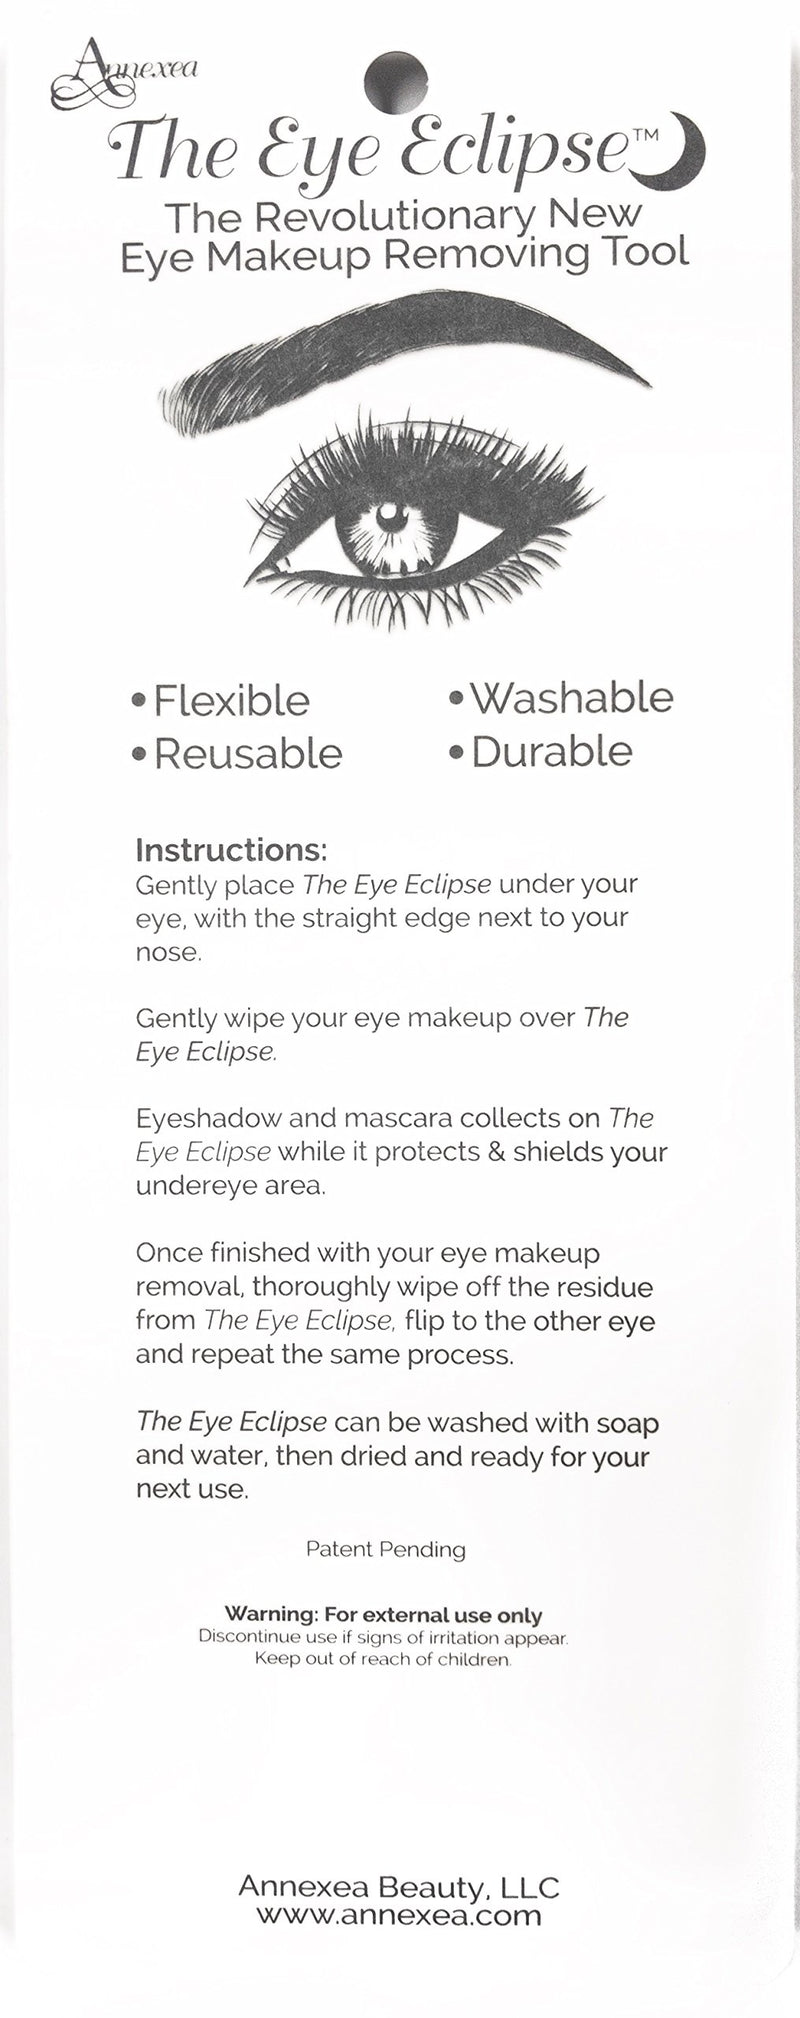 [Australia] - The Eye Eclipse-Eye Makeup Remover Tool - Helps Protect Your Under Eye From Damage & Unnecessary Wrinkles - Mascara Shield - Shadow Shield 